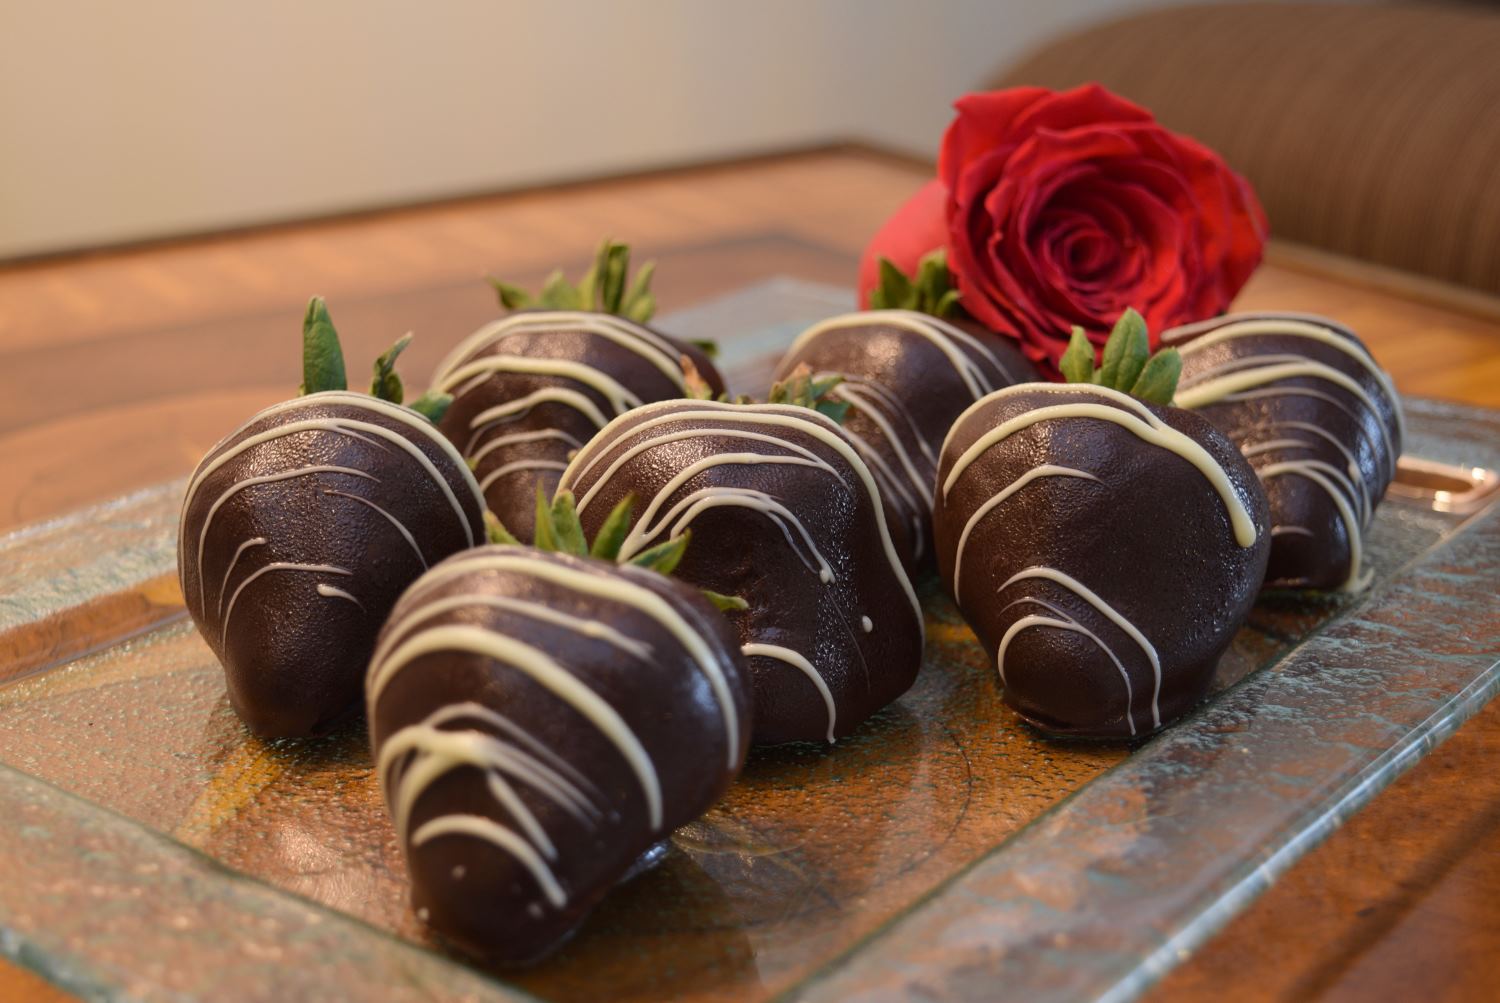 Chocolate Strawberries Add-On Amenity at O.Henry Hotel in Greensboro, NC